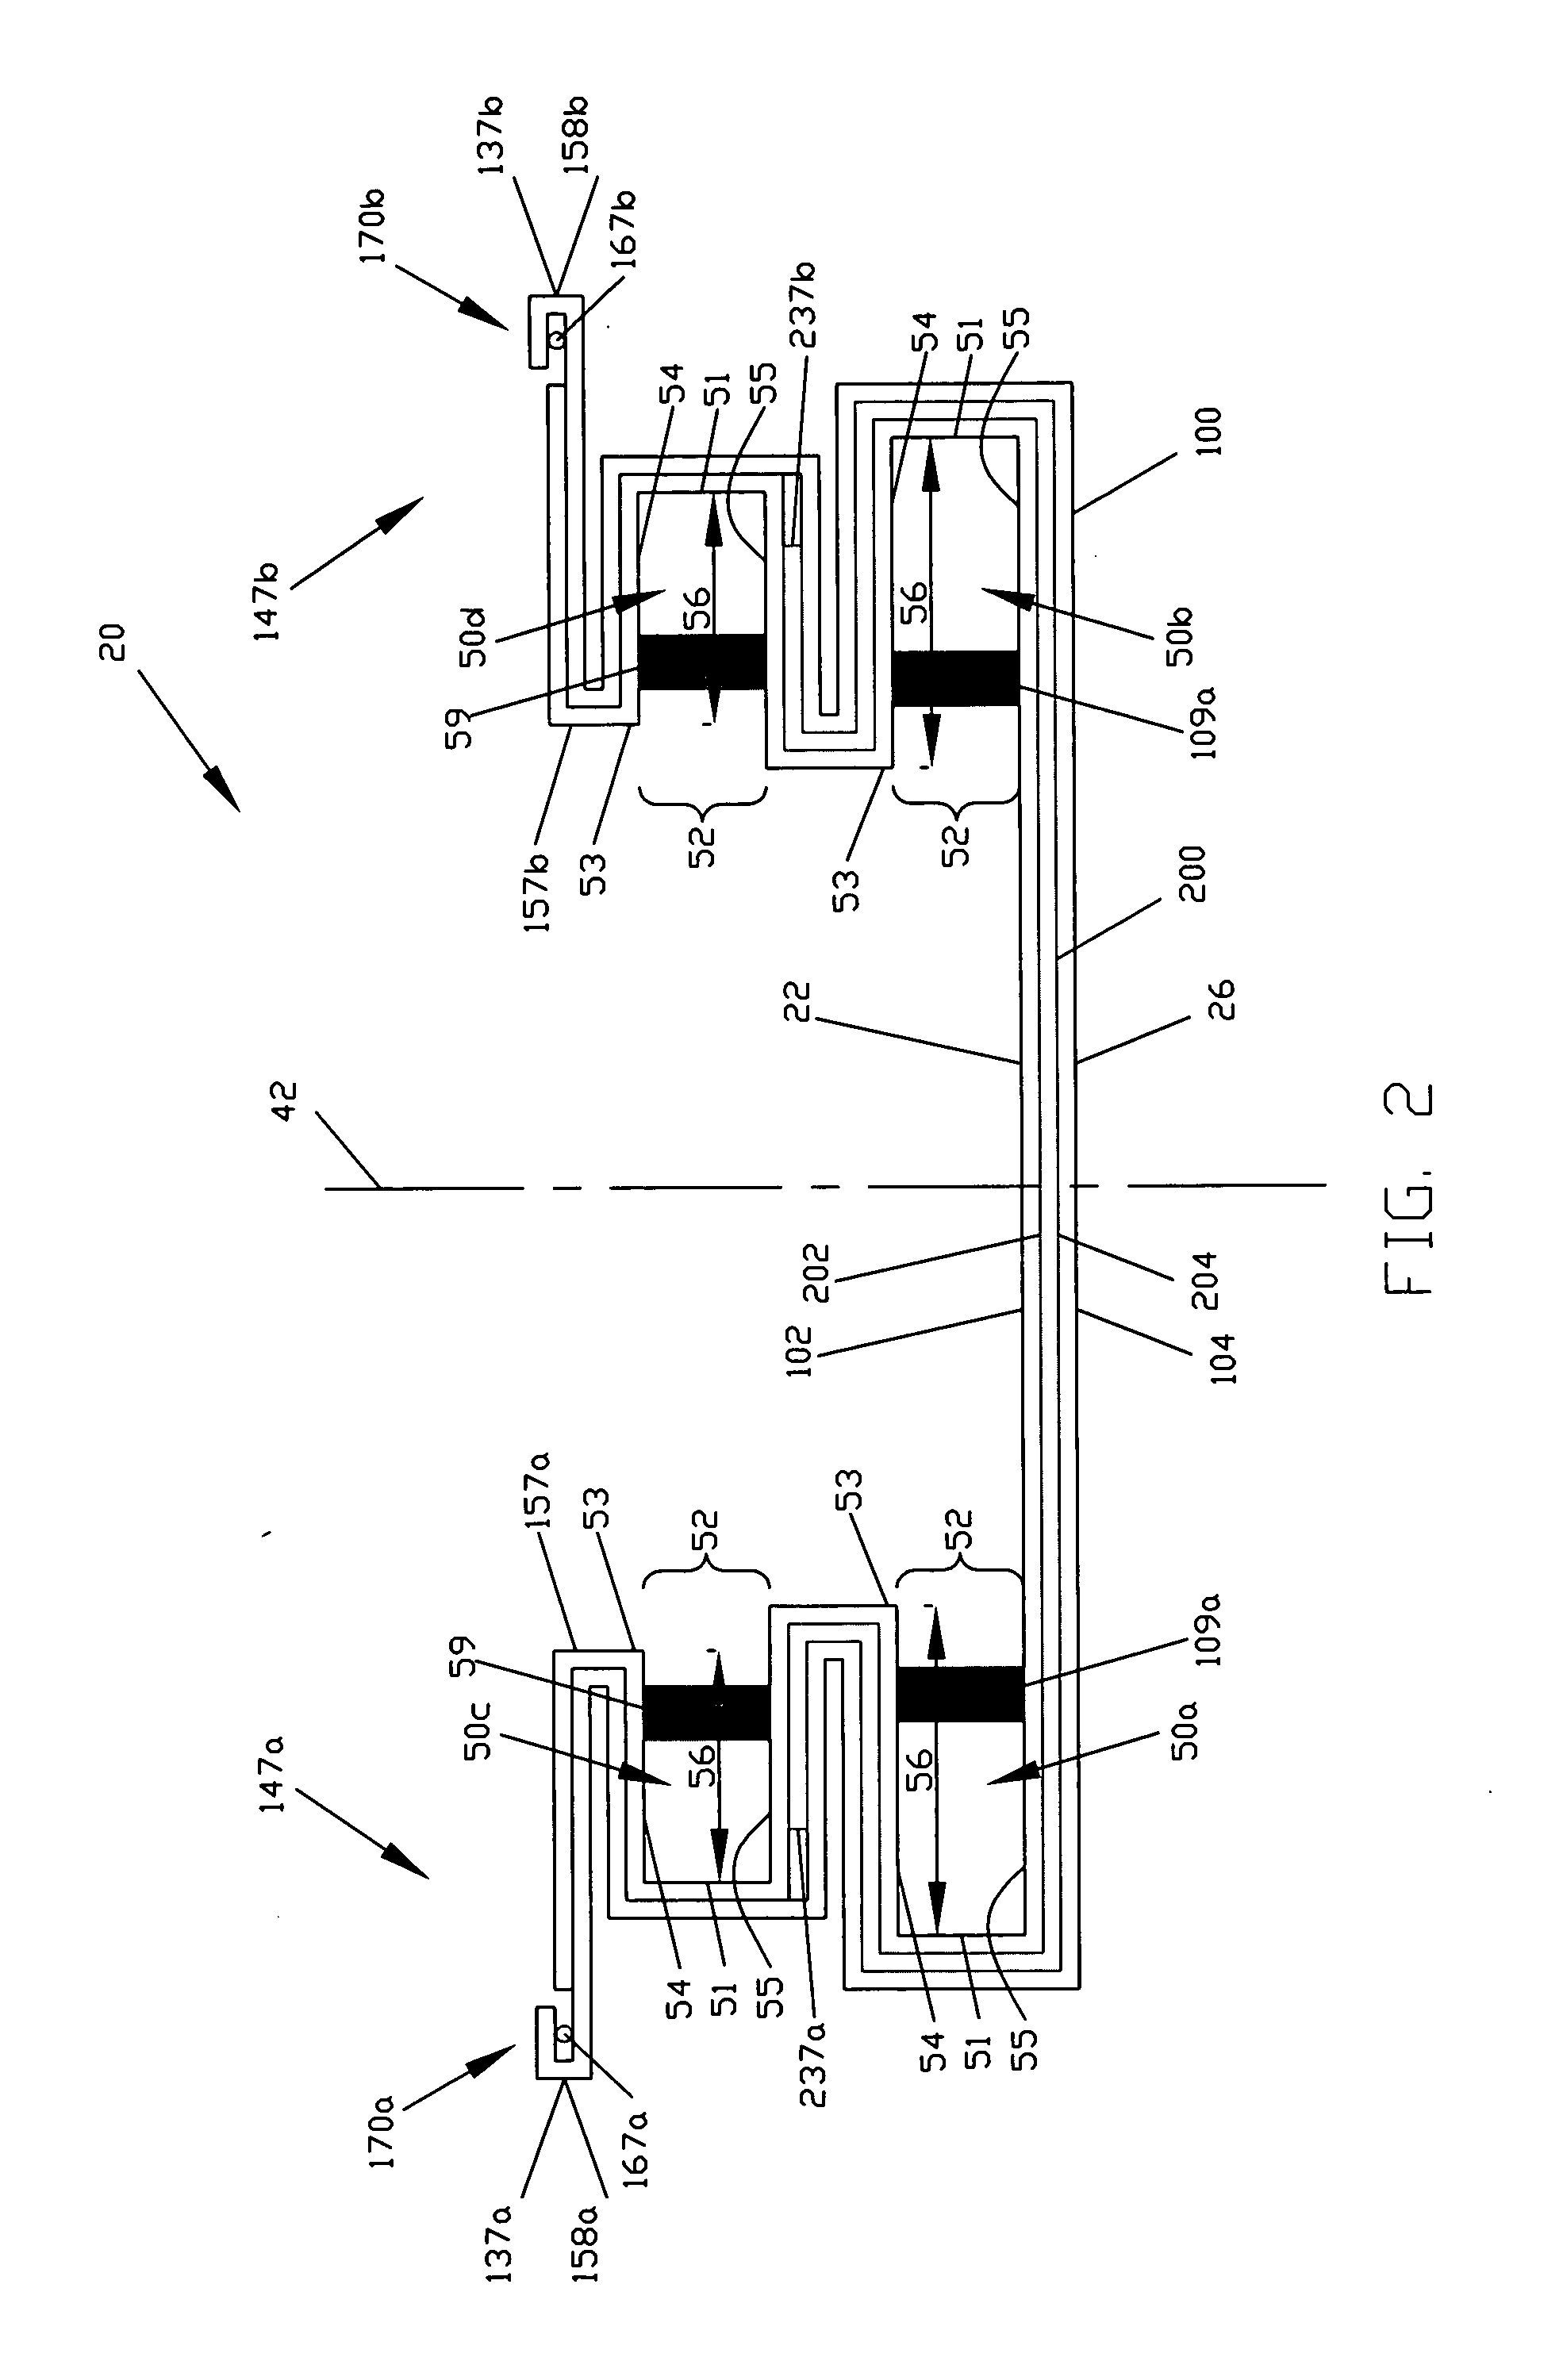 Disposable absorbent article having layered containment pockets